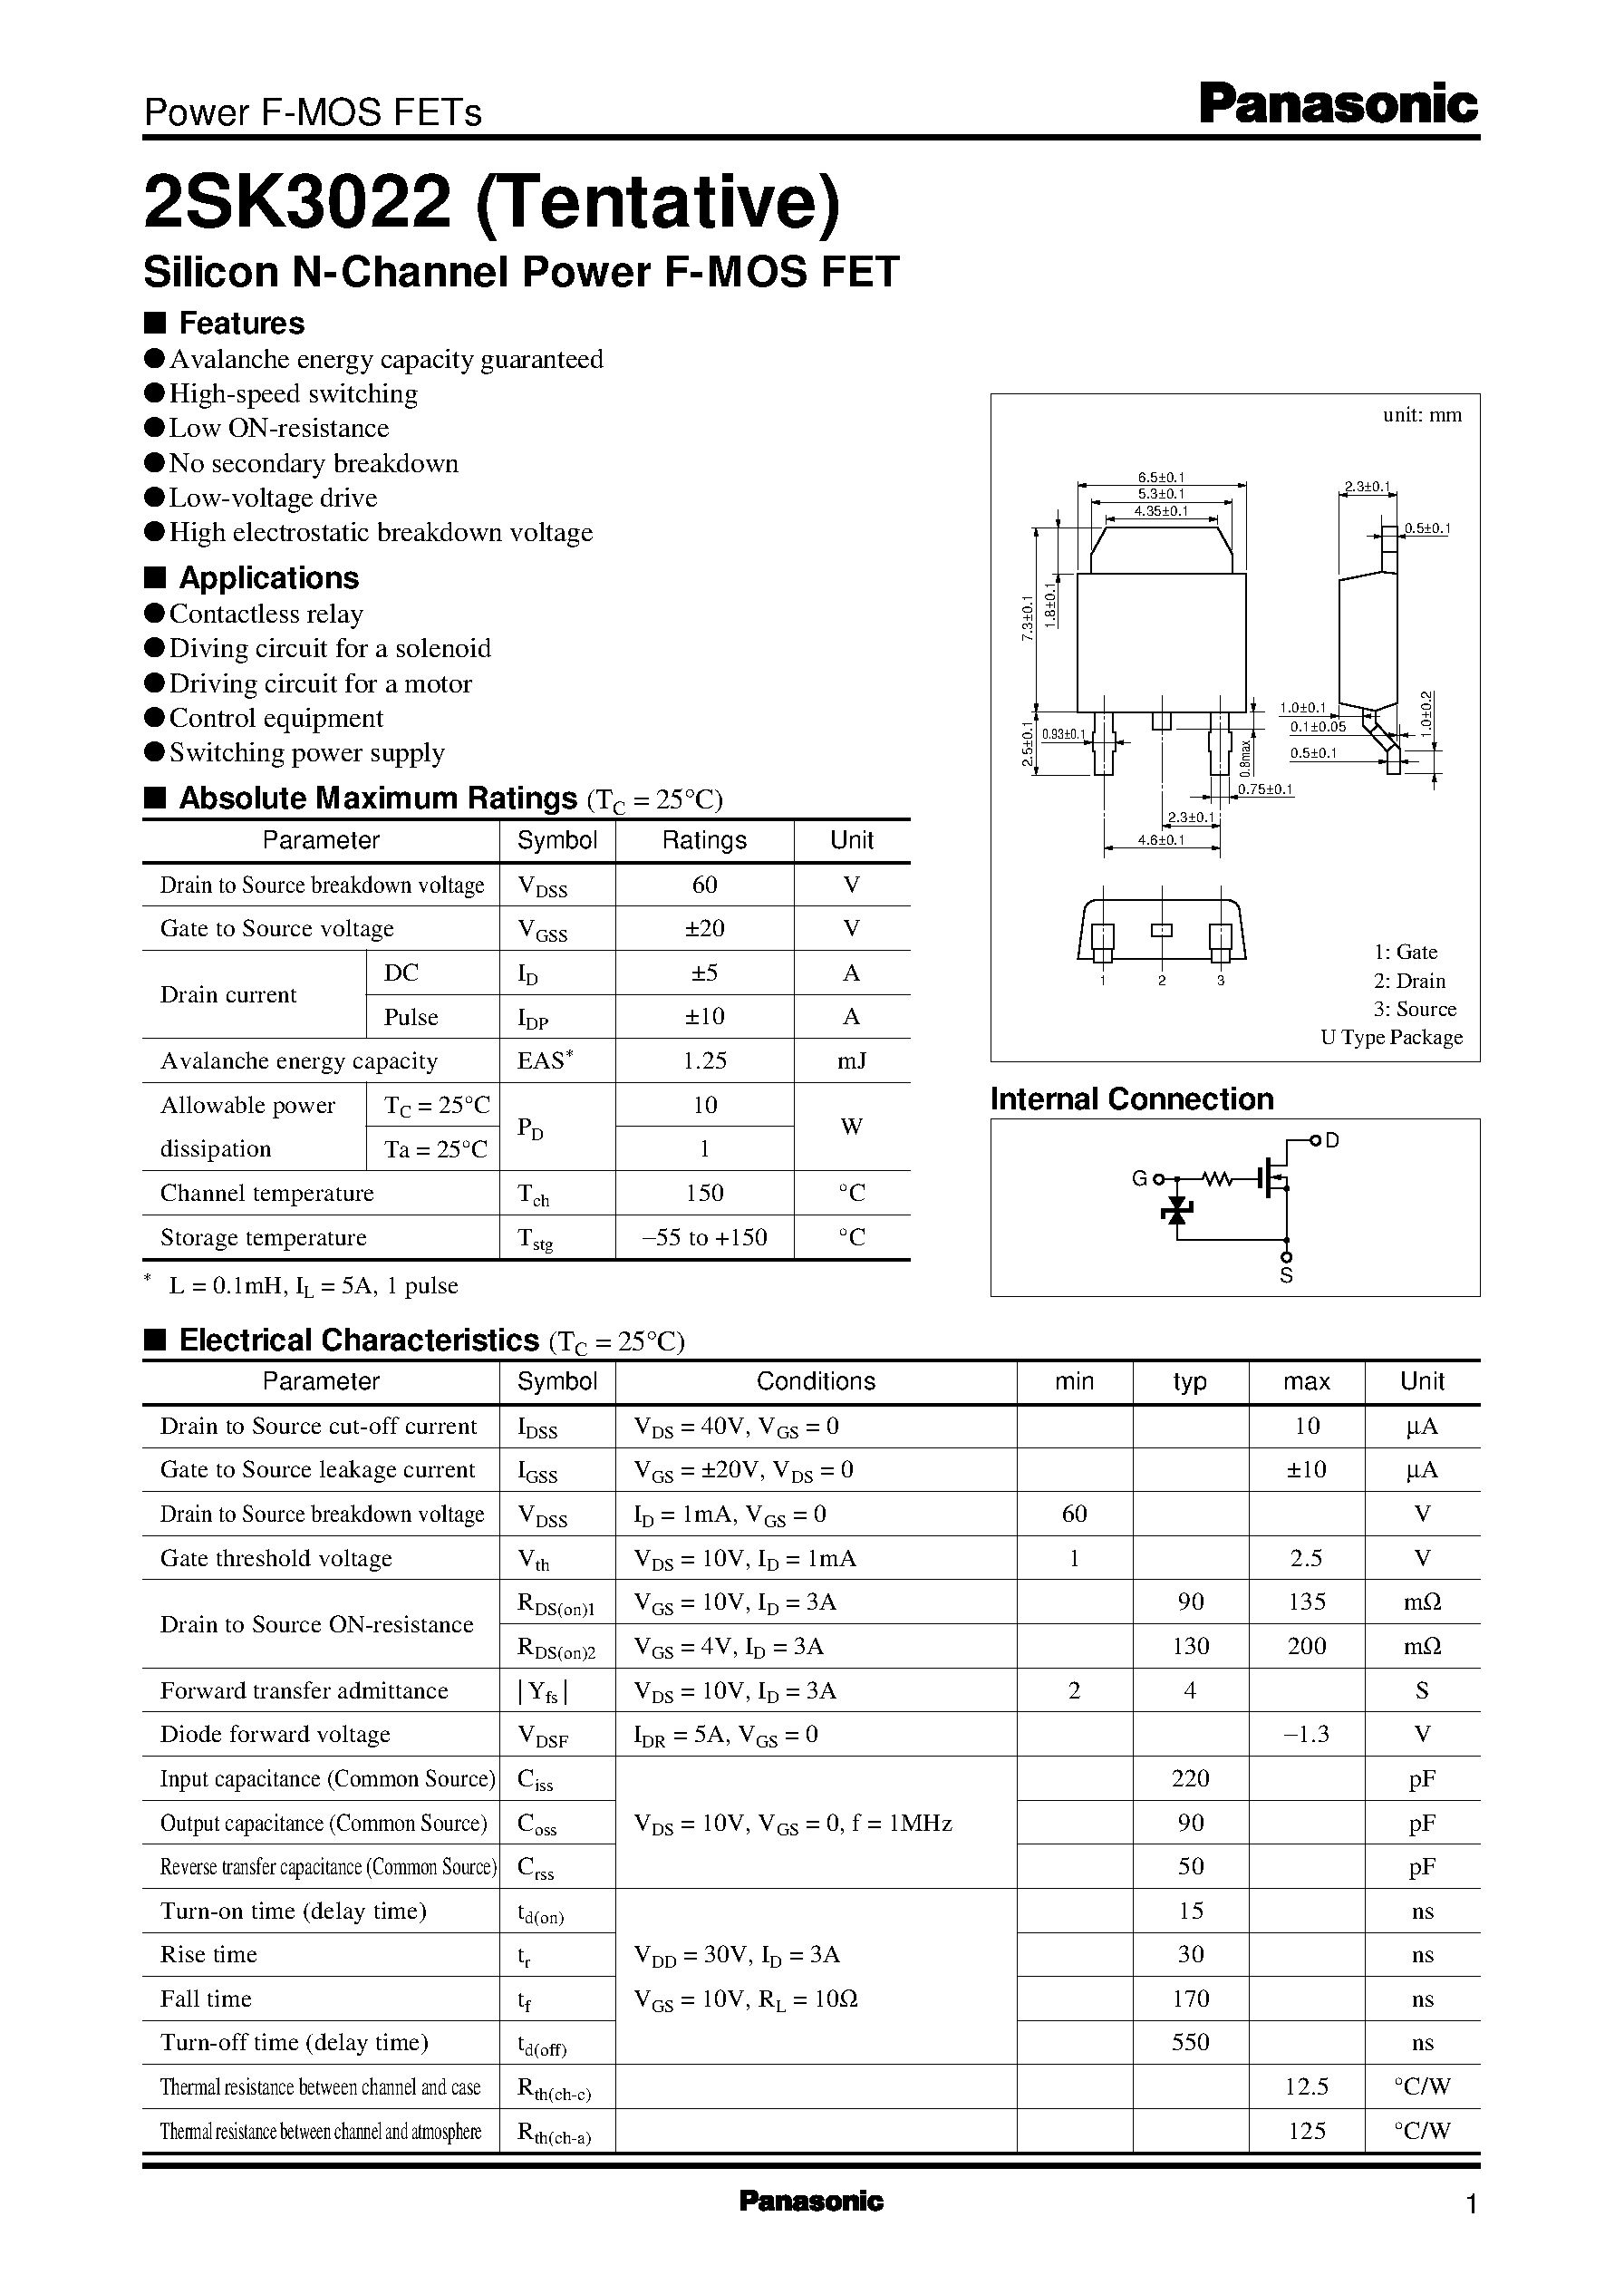 Datasheet 2SK3022 - Silicon N-Channel Power F-MOS FET page 1